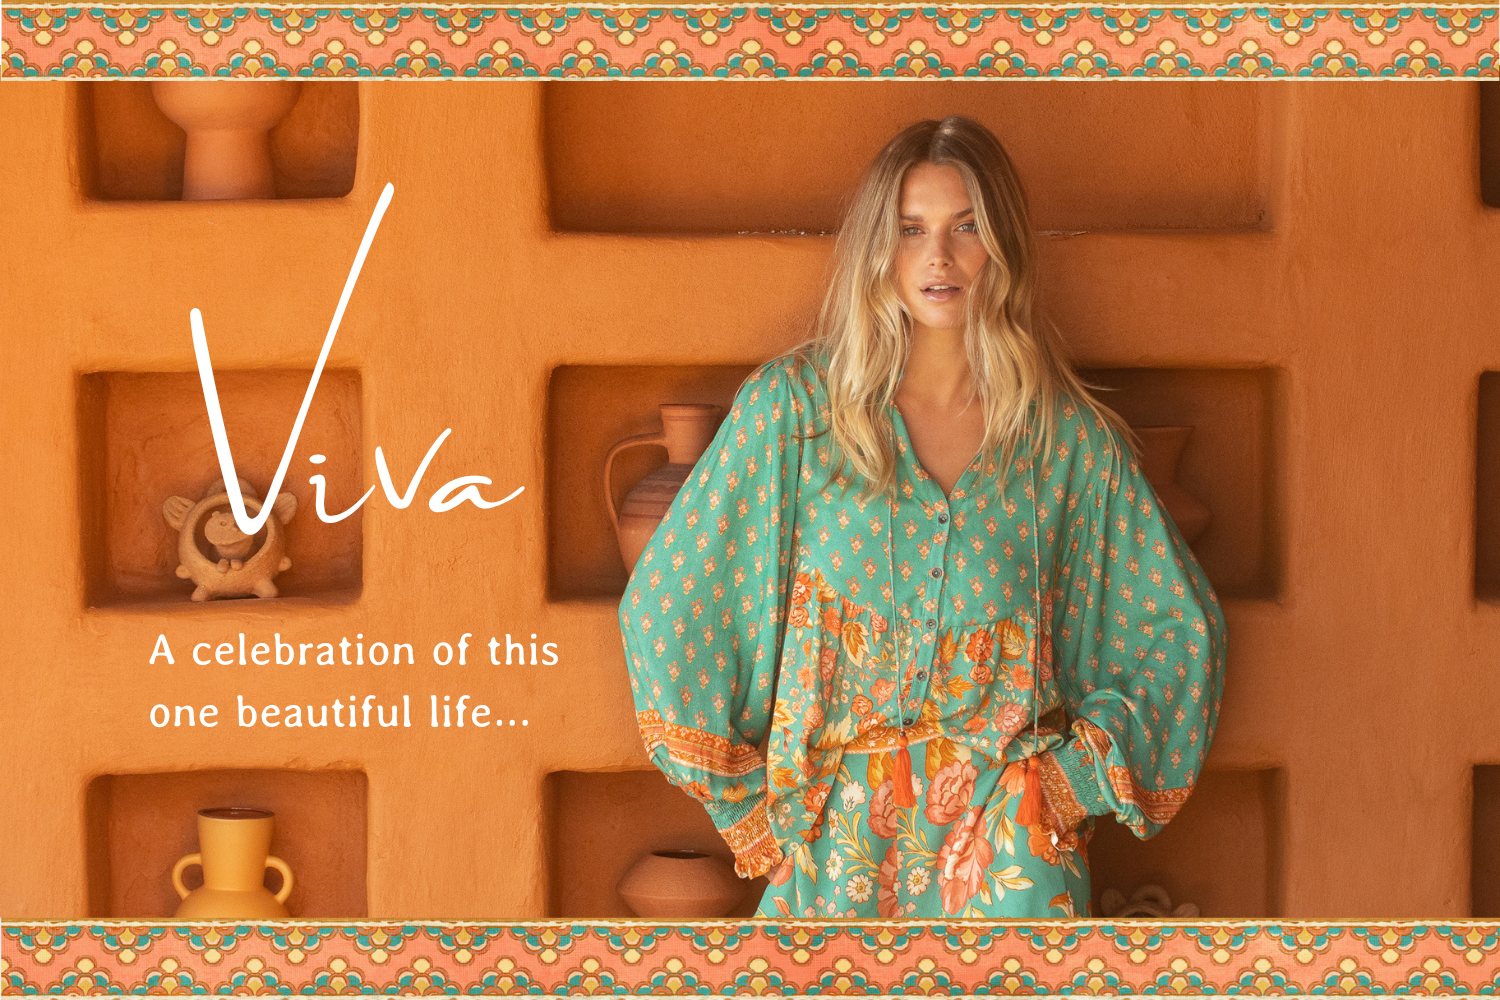 VIVA! By Bella Boheme - A celebration of this one beautiful life…